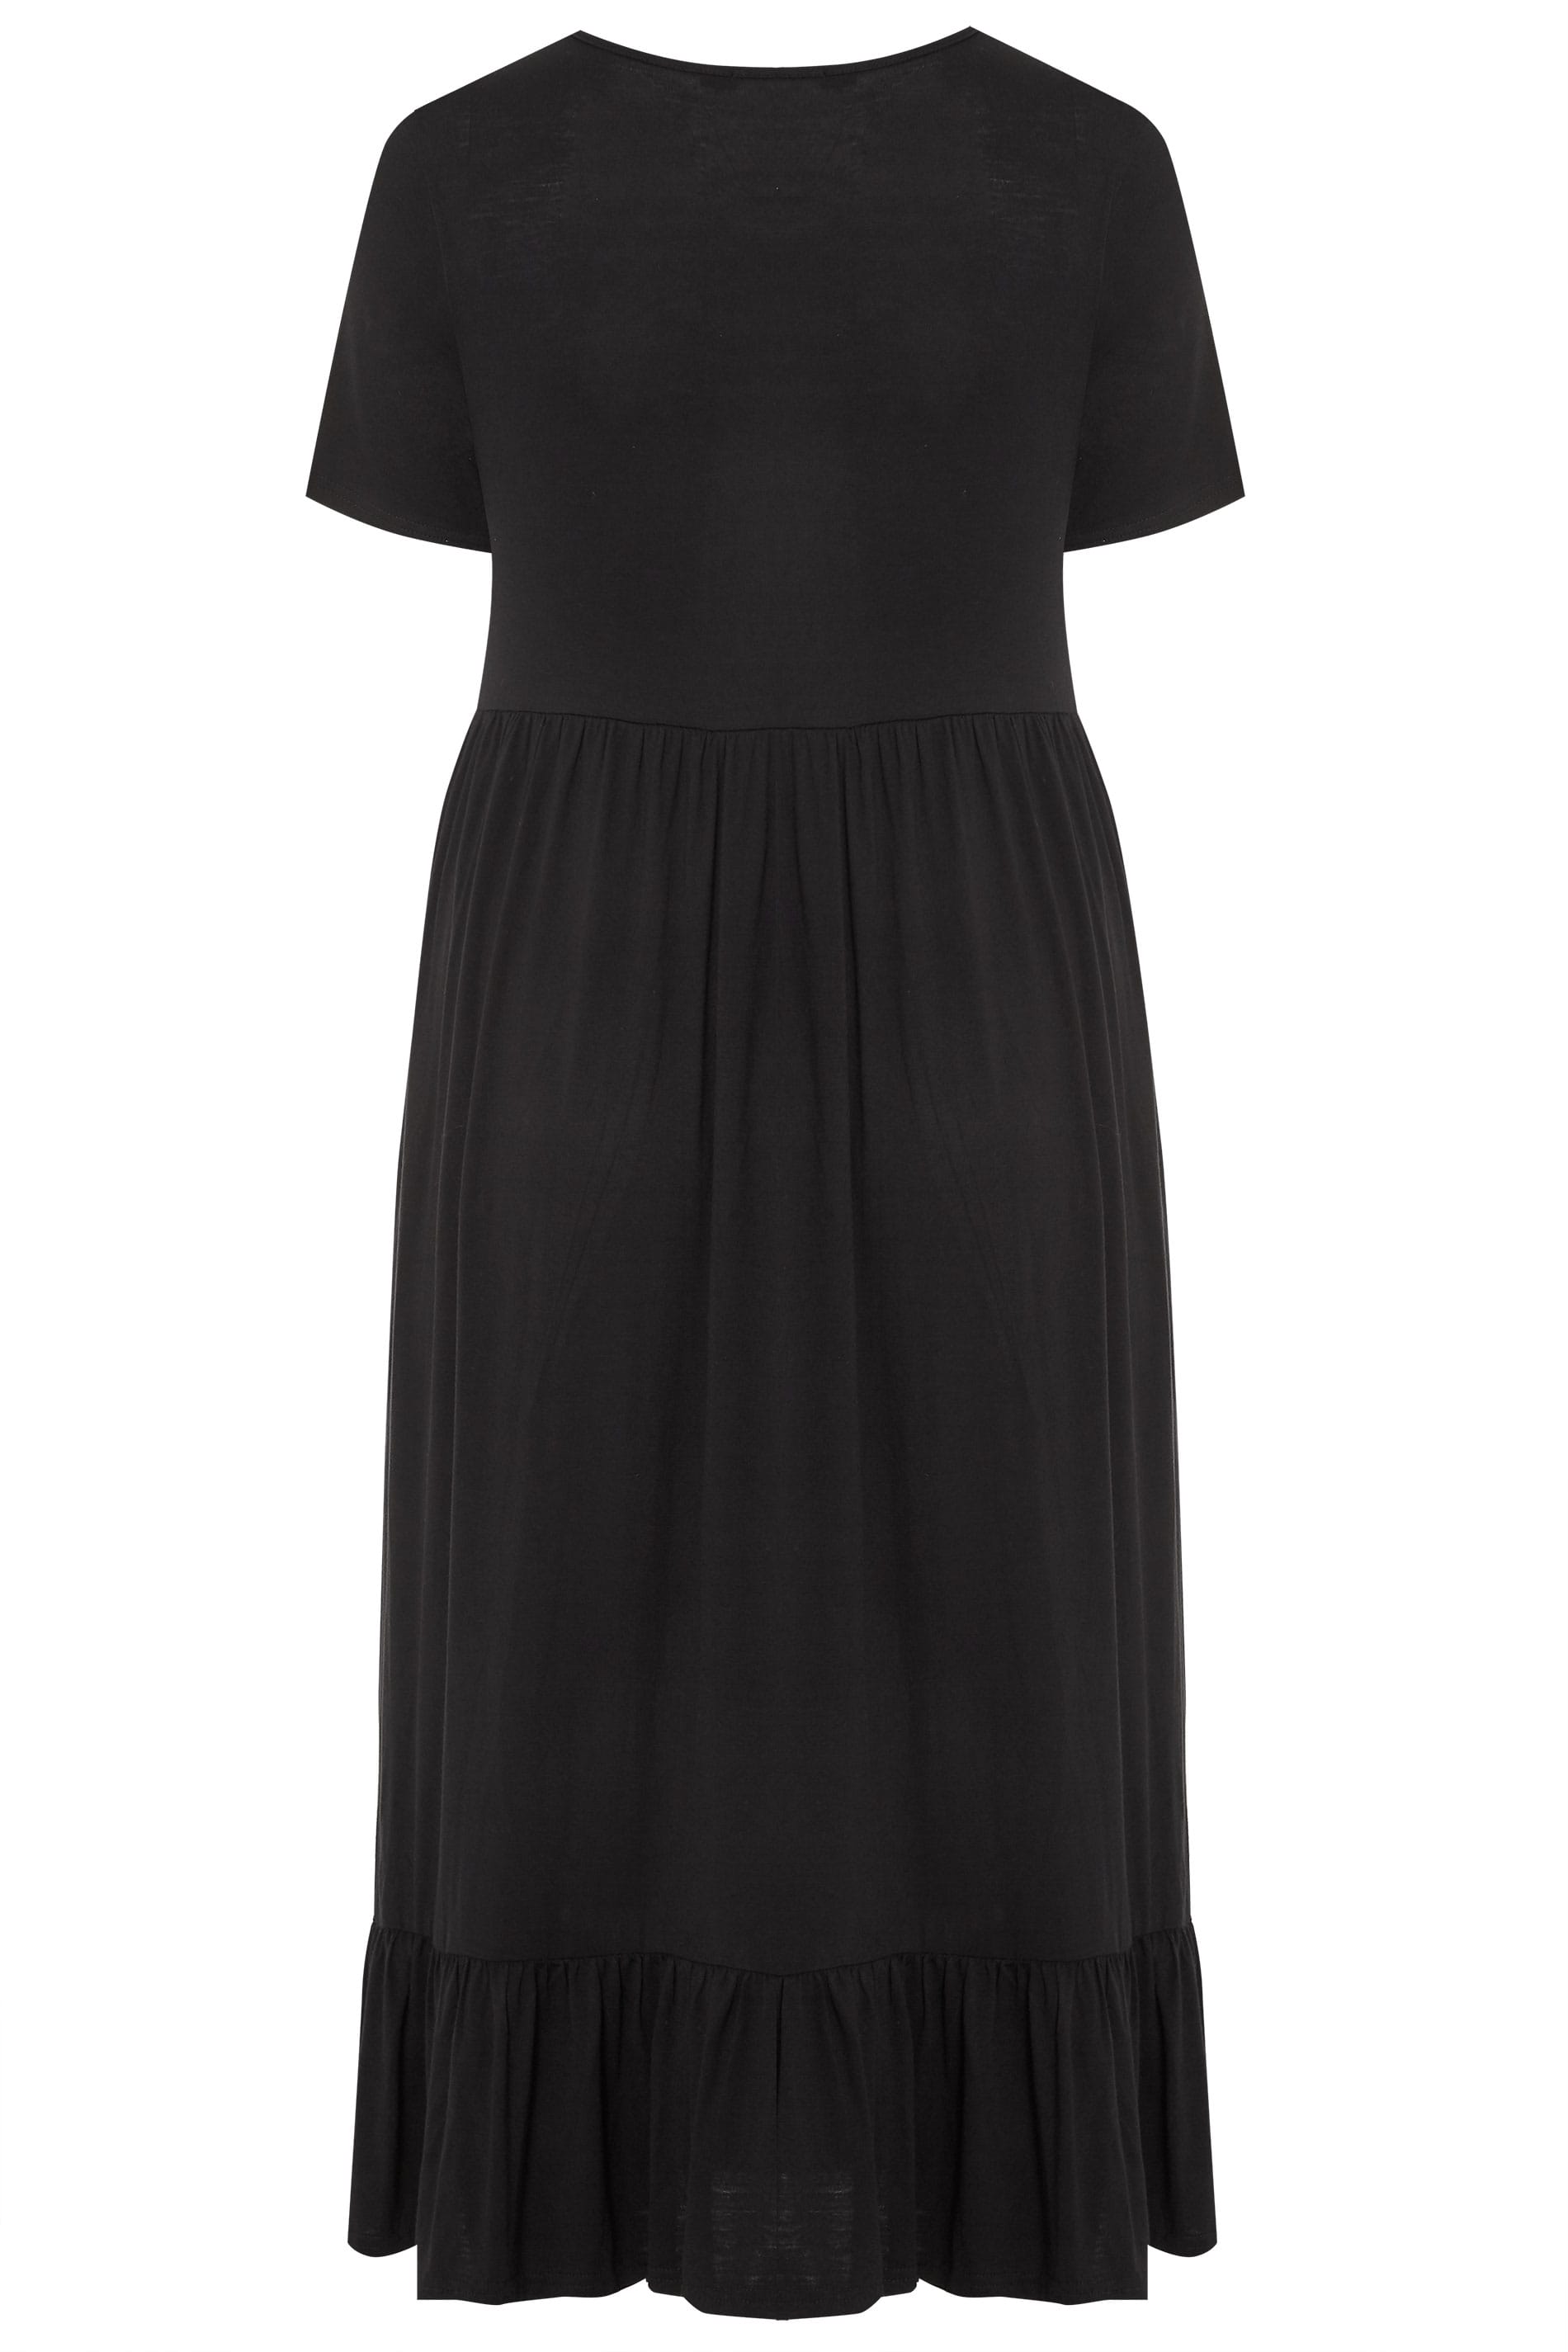 LIMITED COLLECTION Black Tiered Maxi Smock Dress | Yours Clothing